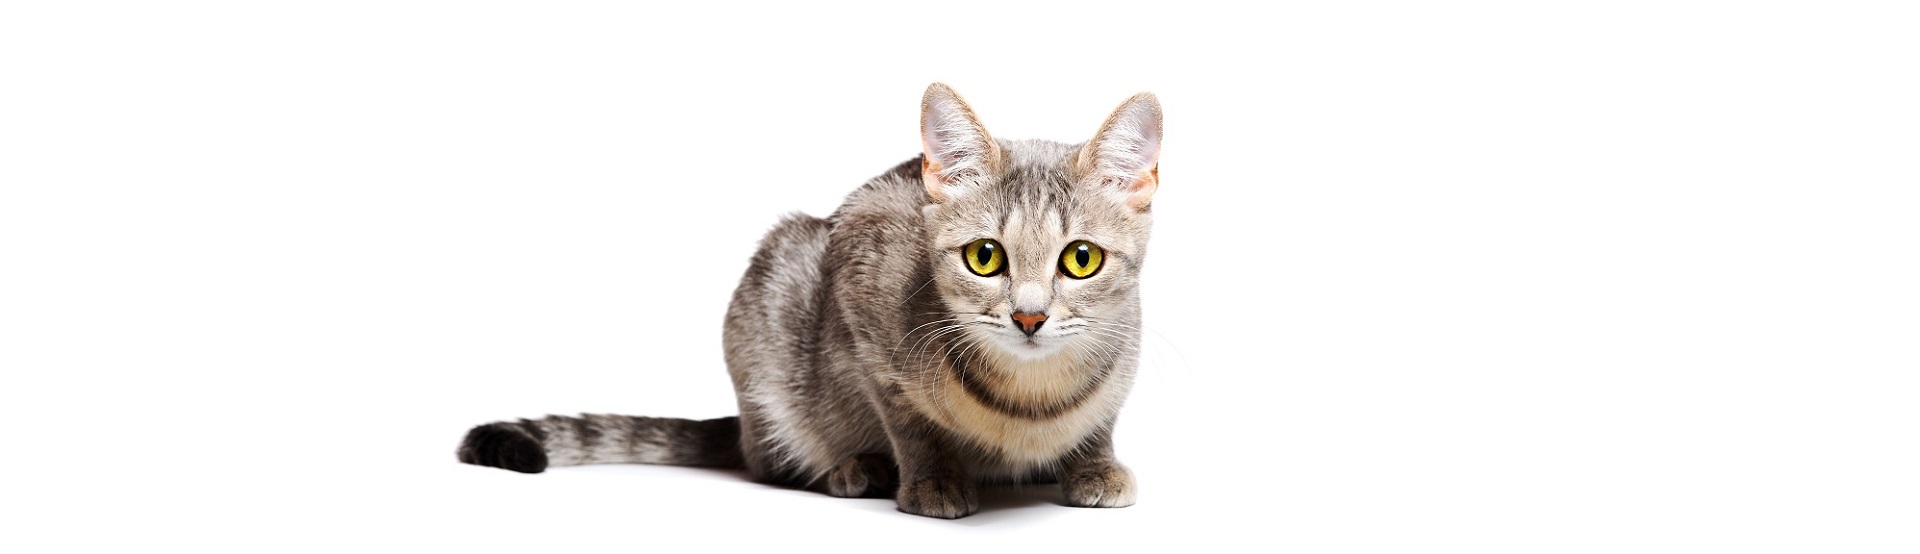 how cats communicate with vocalizations and body language